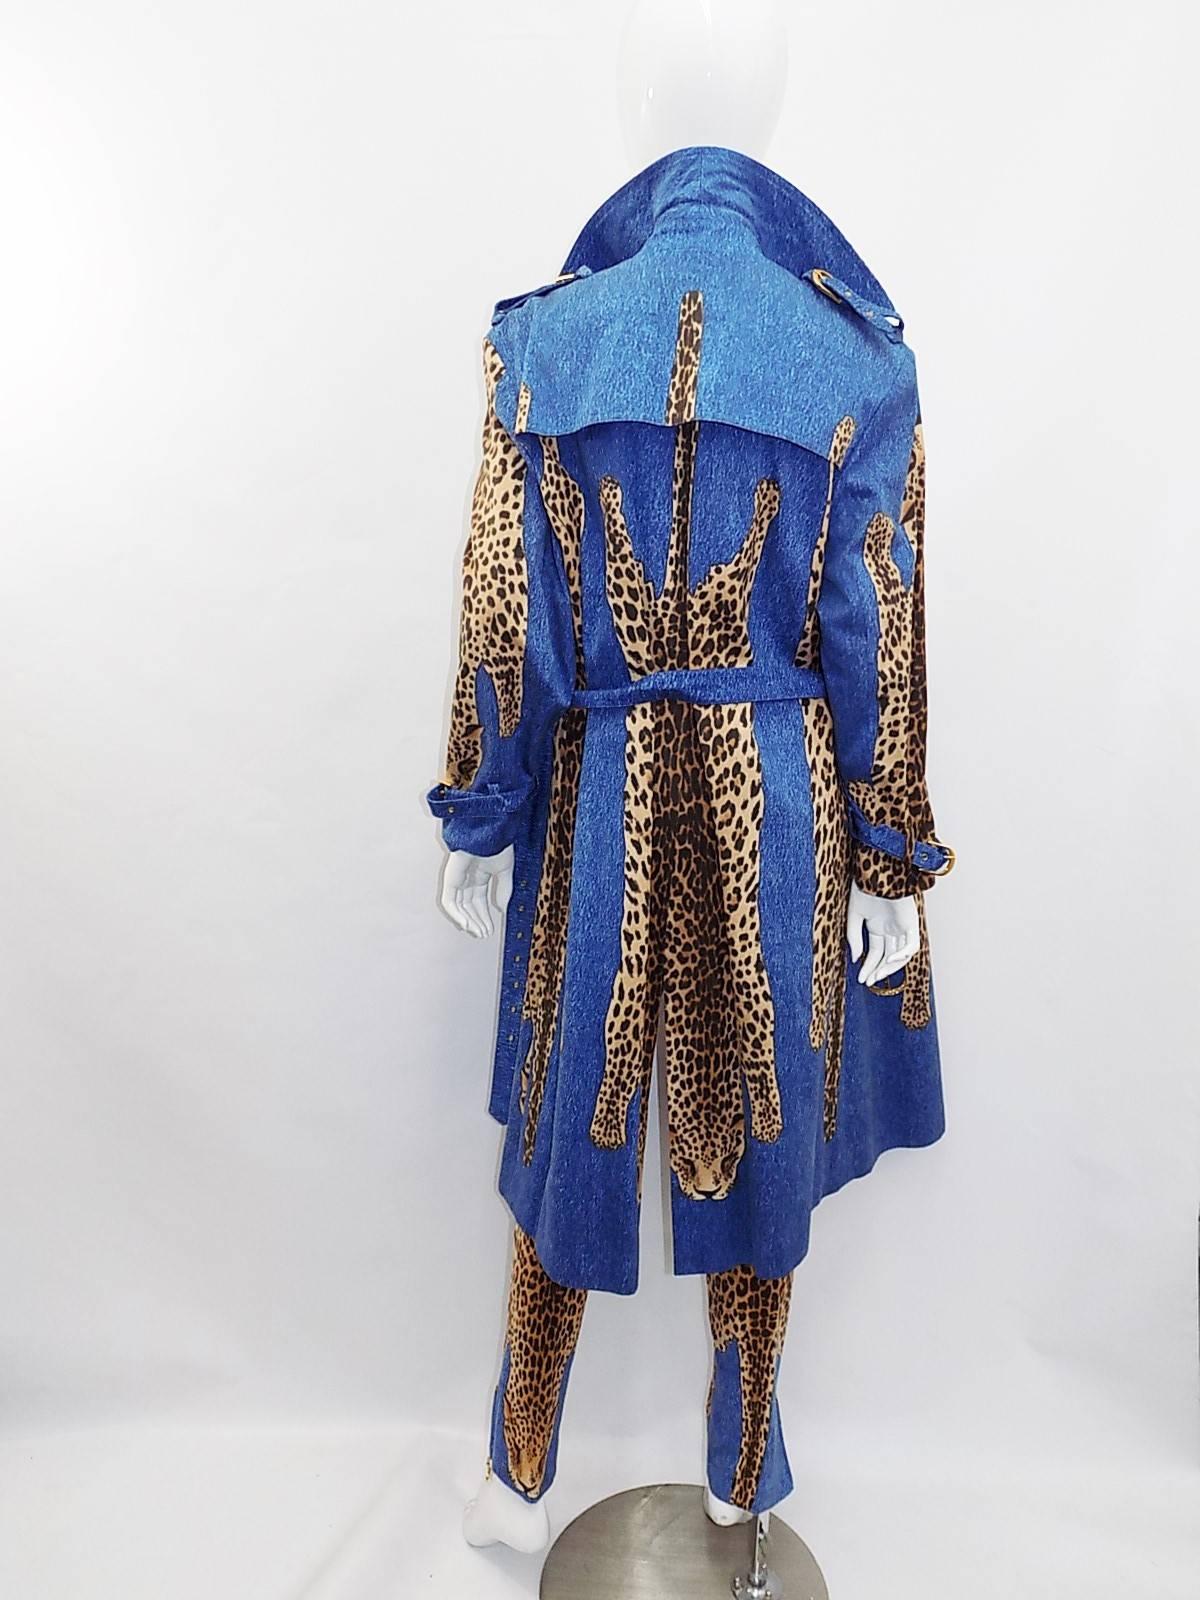 Only John Galliano could come up with outgregious and spectacular designs like this!! From Famous collection 1999 here comes trench coat, Blue jeans with full leopard skins printed . Large C D logos in brass as  buttons. Skiiny leg pants/ jeans with